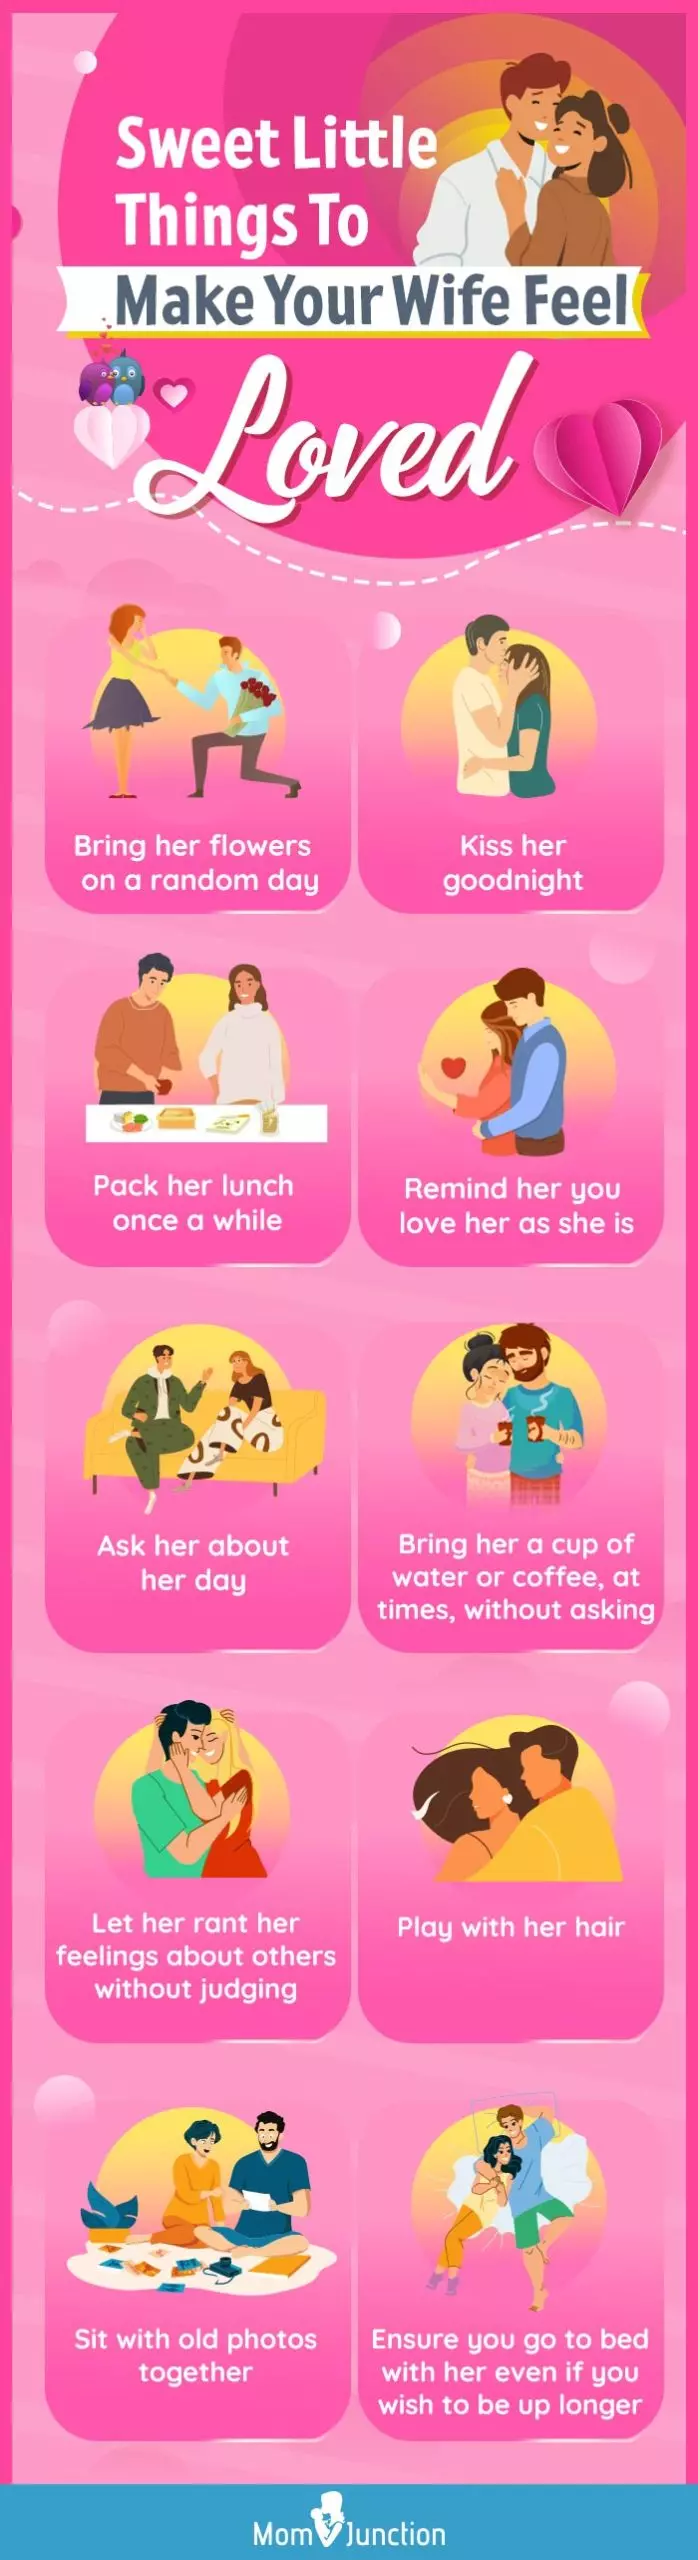 things to make your wife feel loved (infographic)